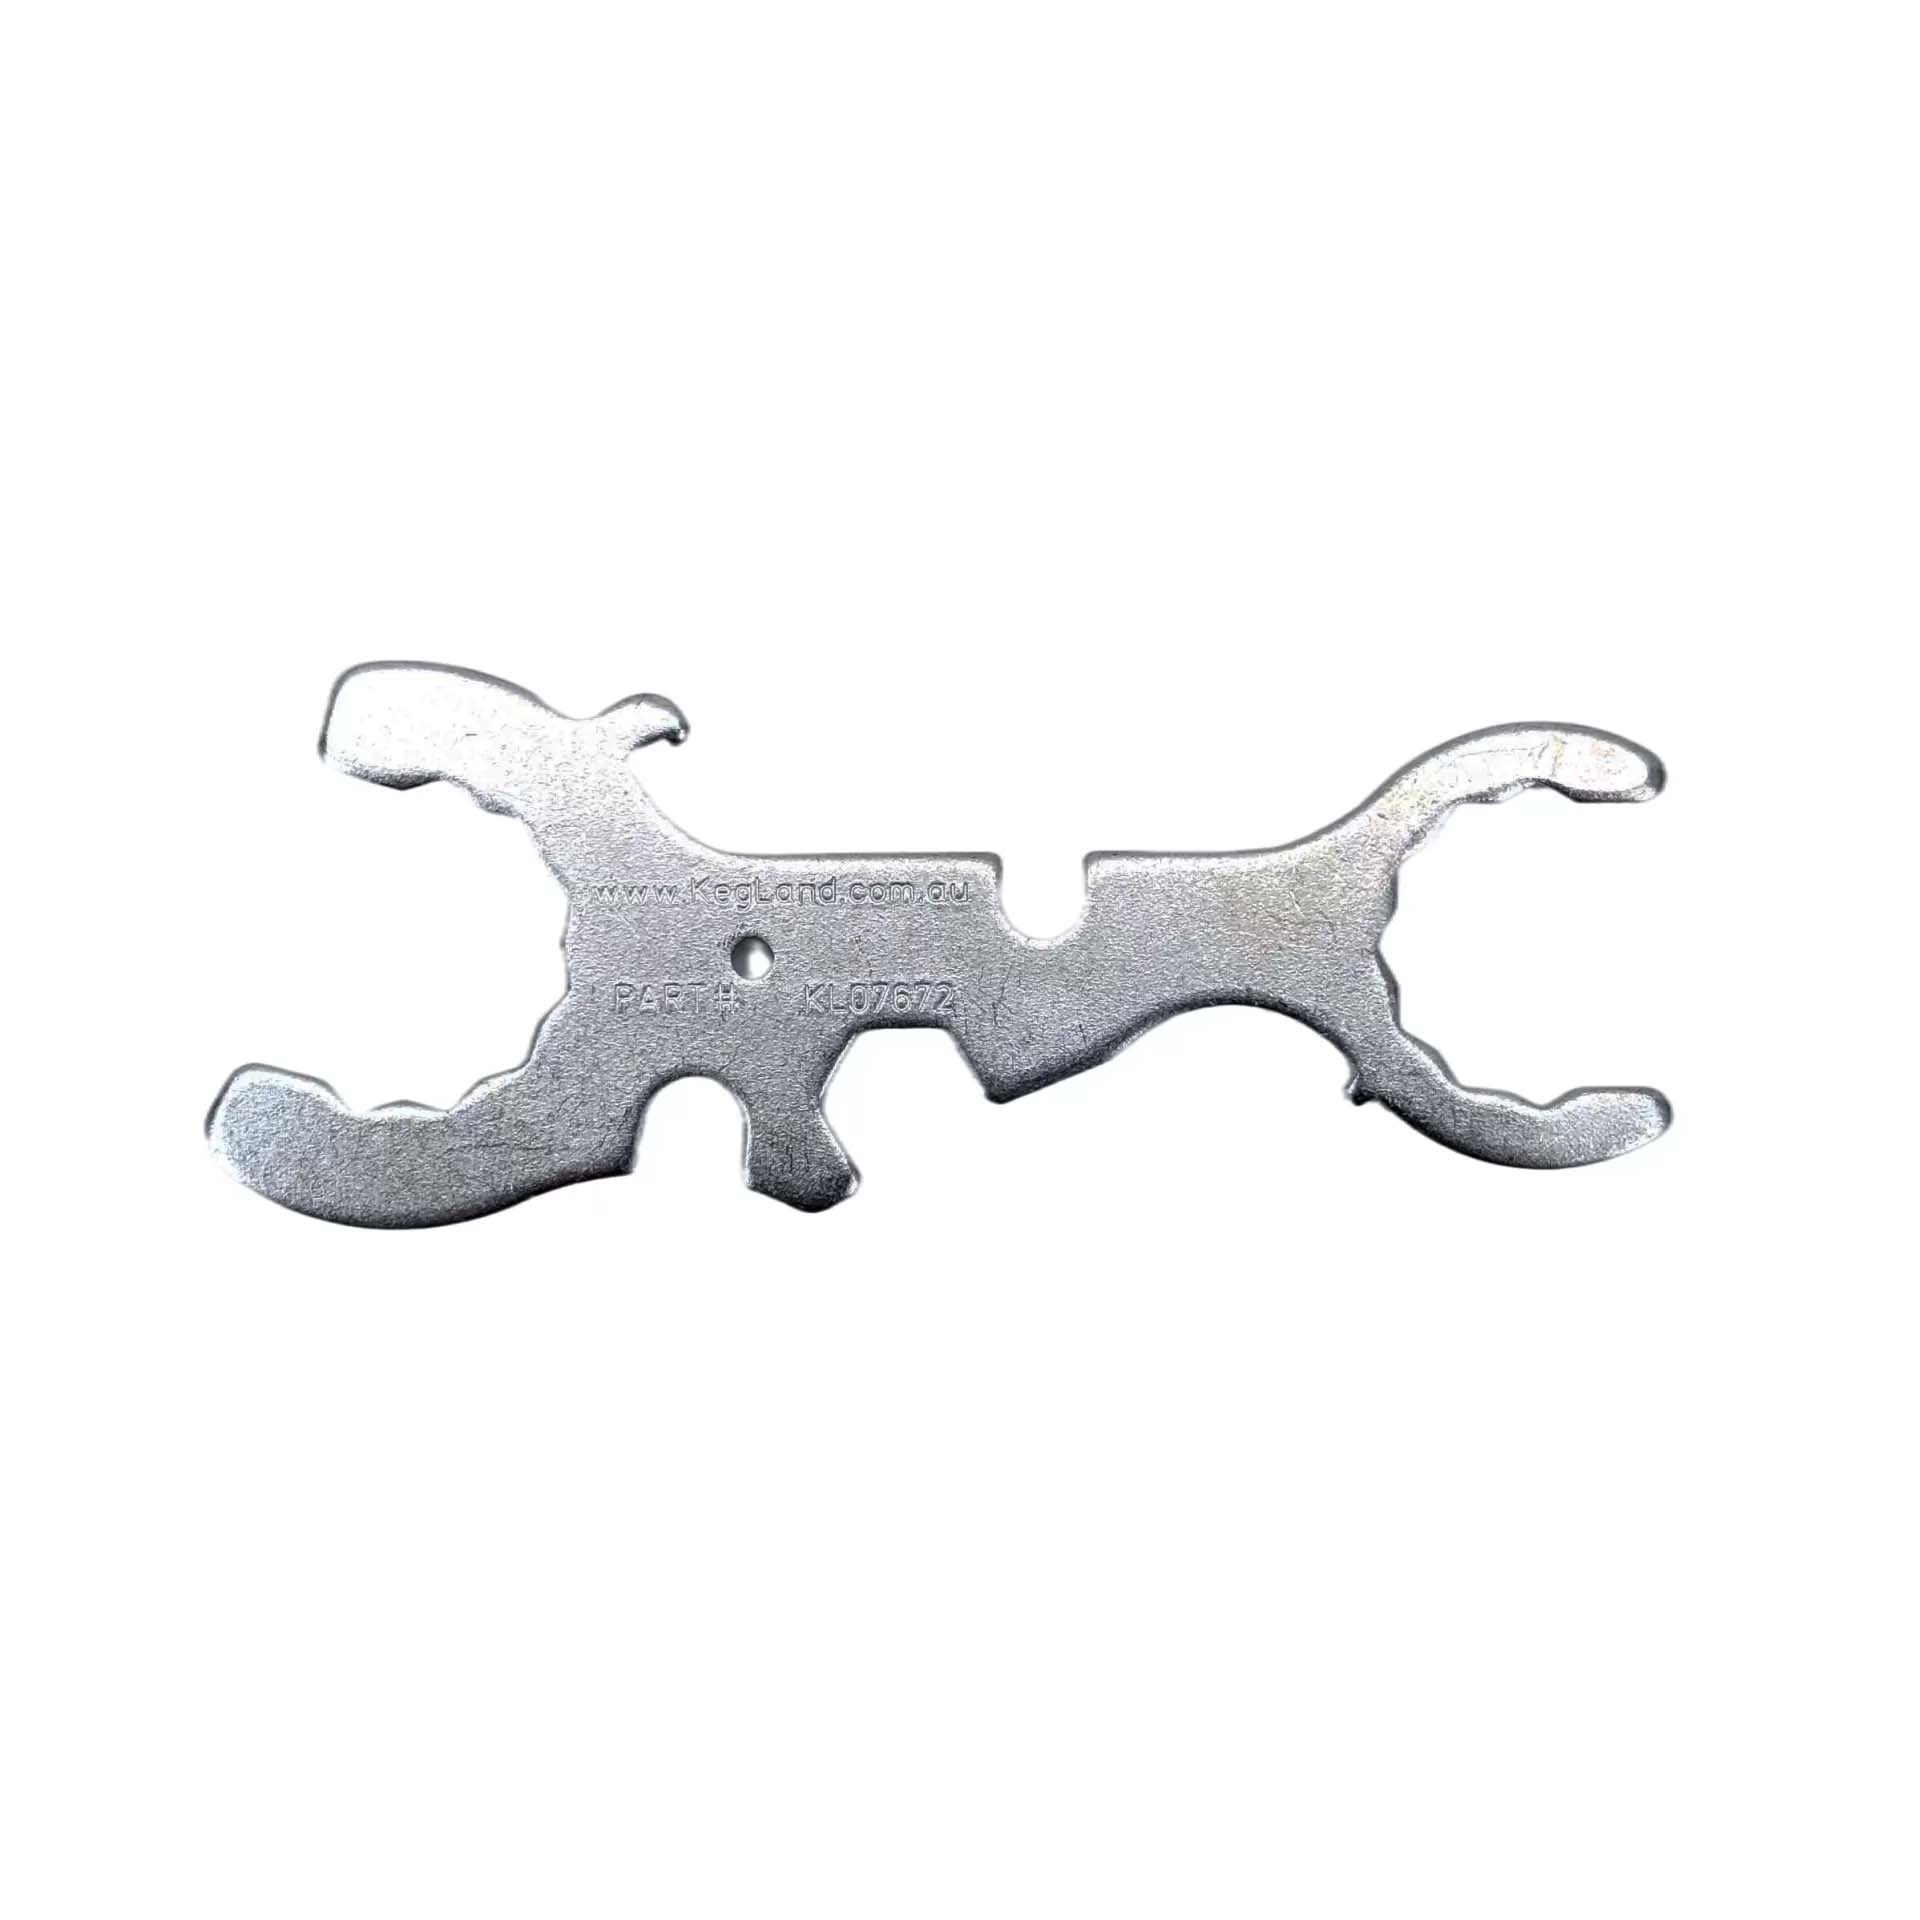 5016618 7  In 1 Faucet Spanner Wrench Tool 1 